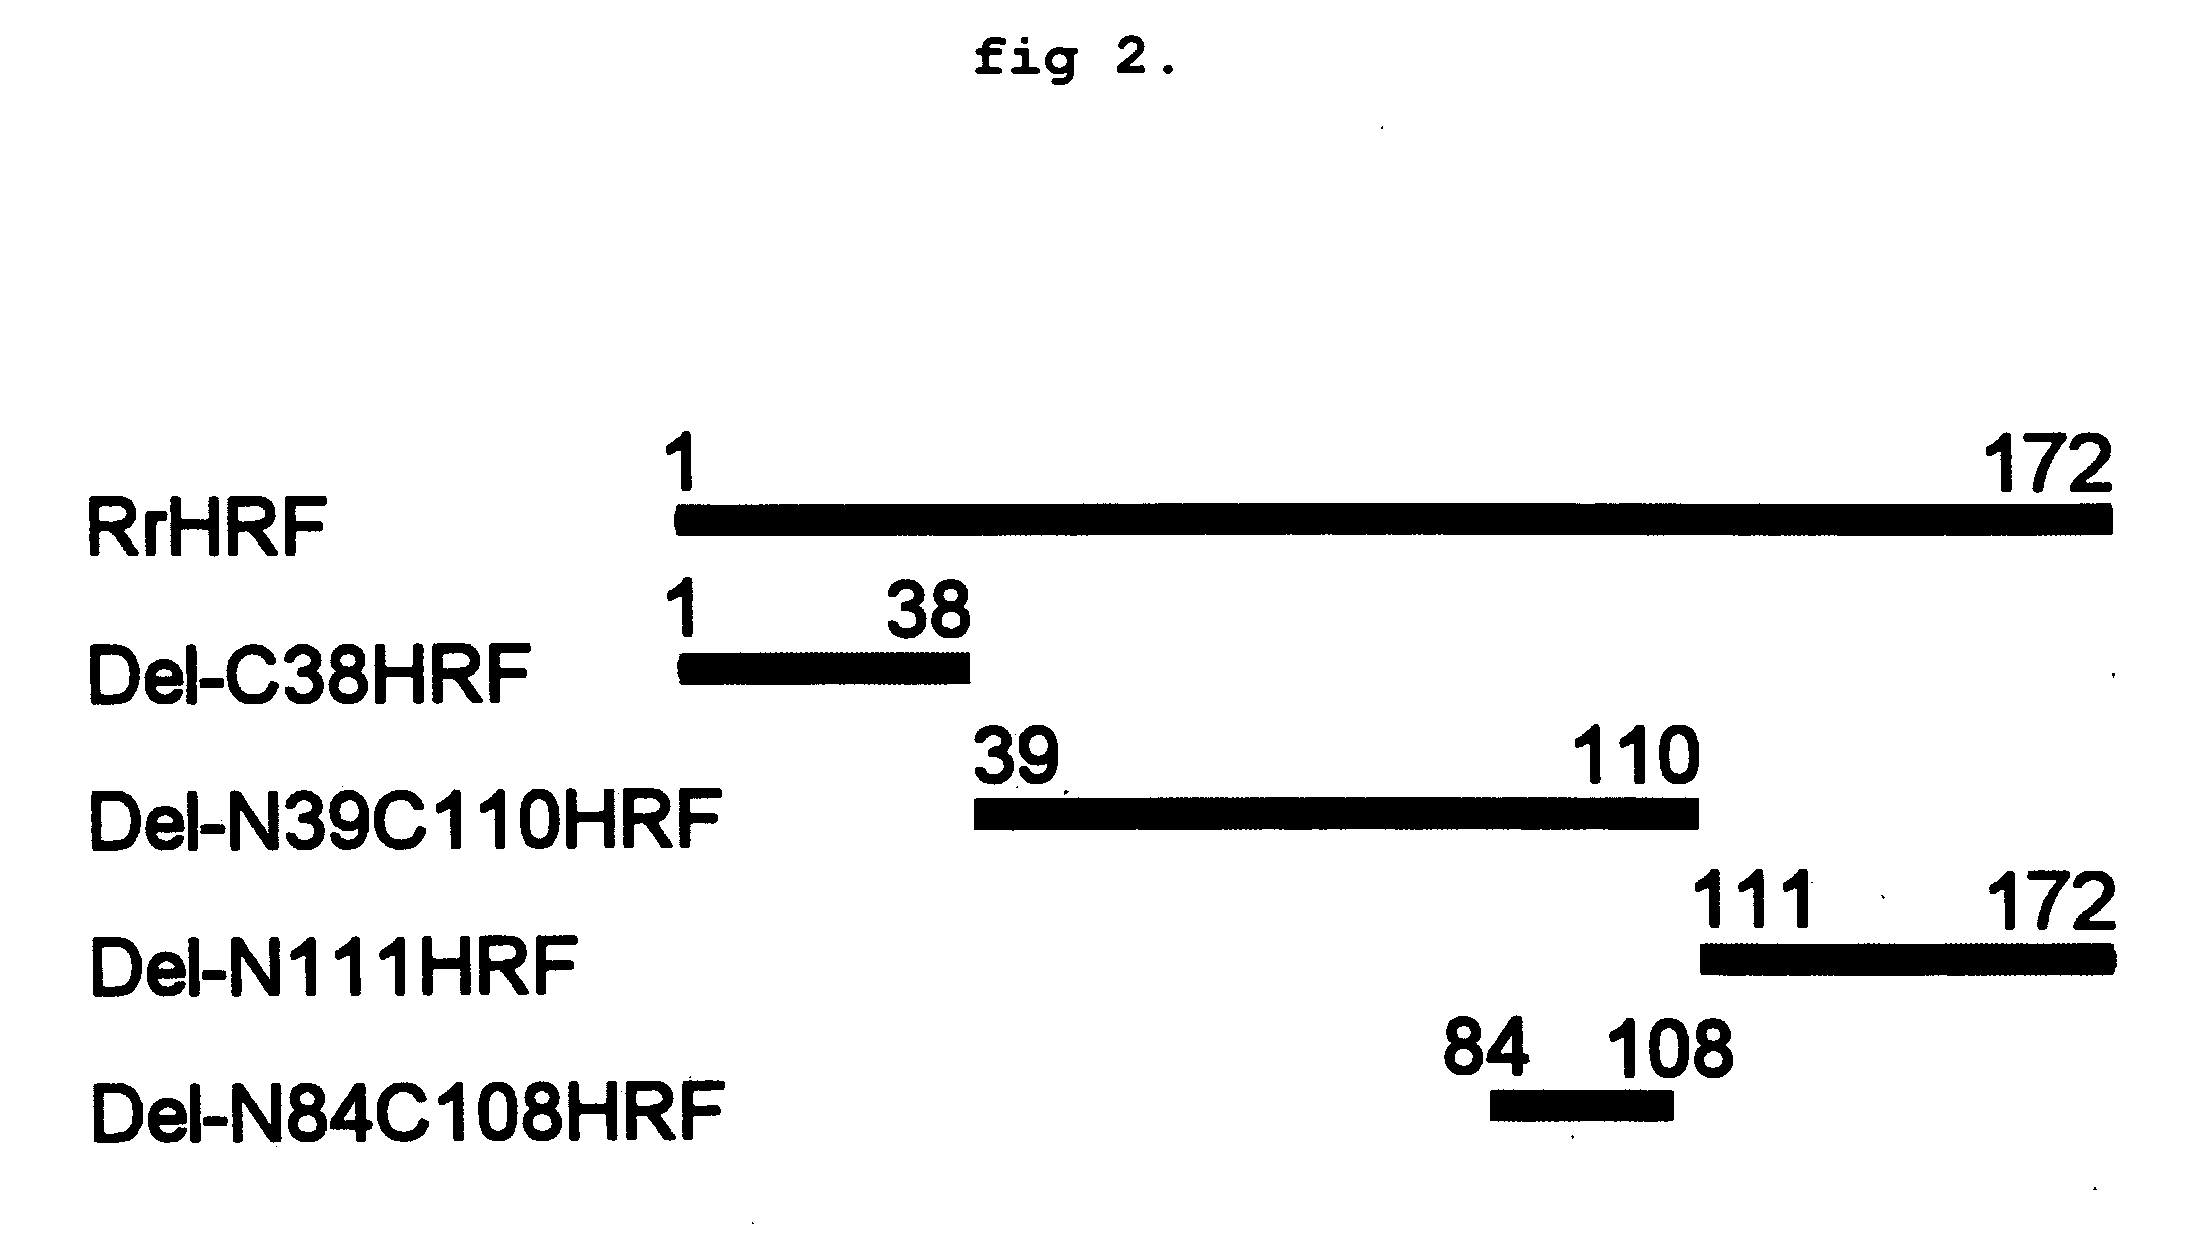 DELETION FORMS OF IgE-DEPENDENT HISTAMINE RELEASING FACTOR HAVING HISTAMINE RELEASING ACTIVITY, HRF-BINDING PEPTIDES AND THE USES THEREOF